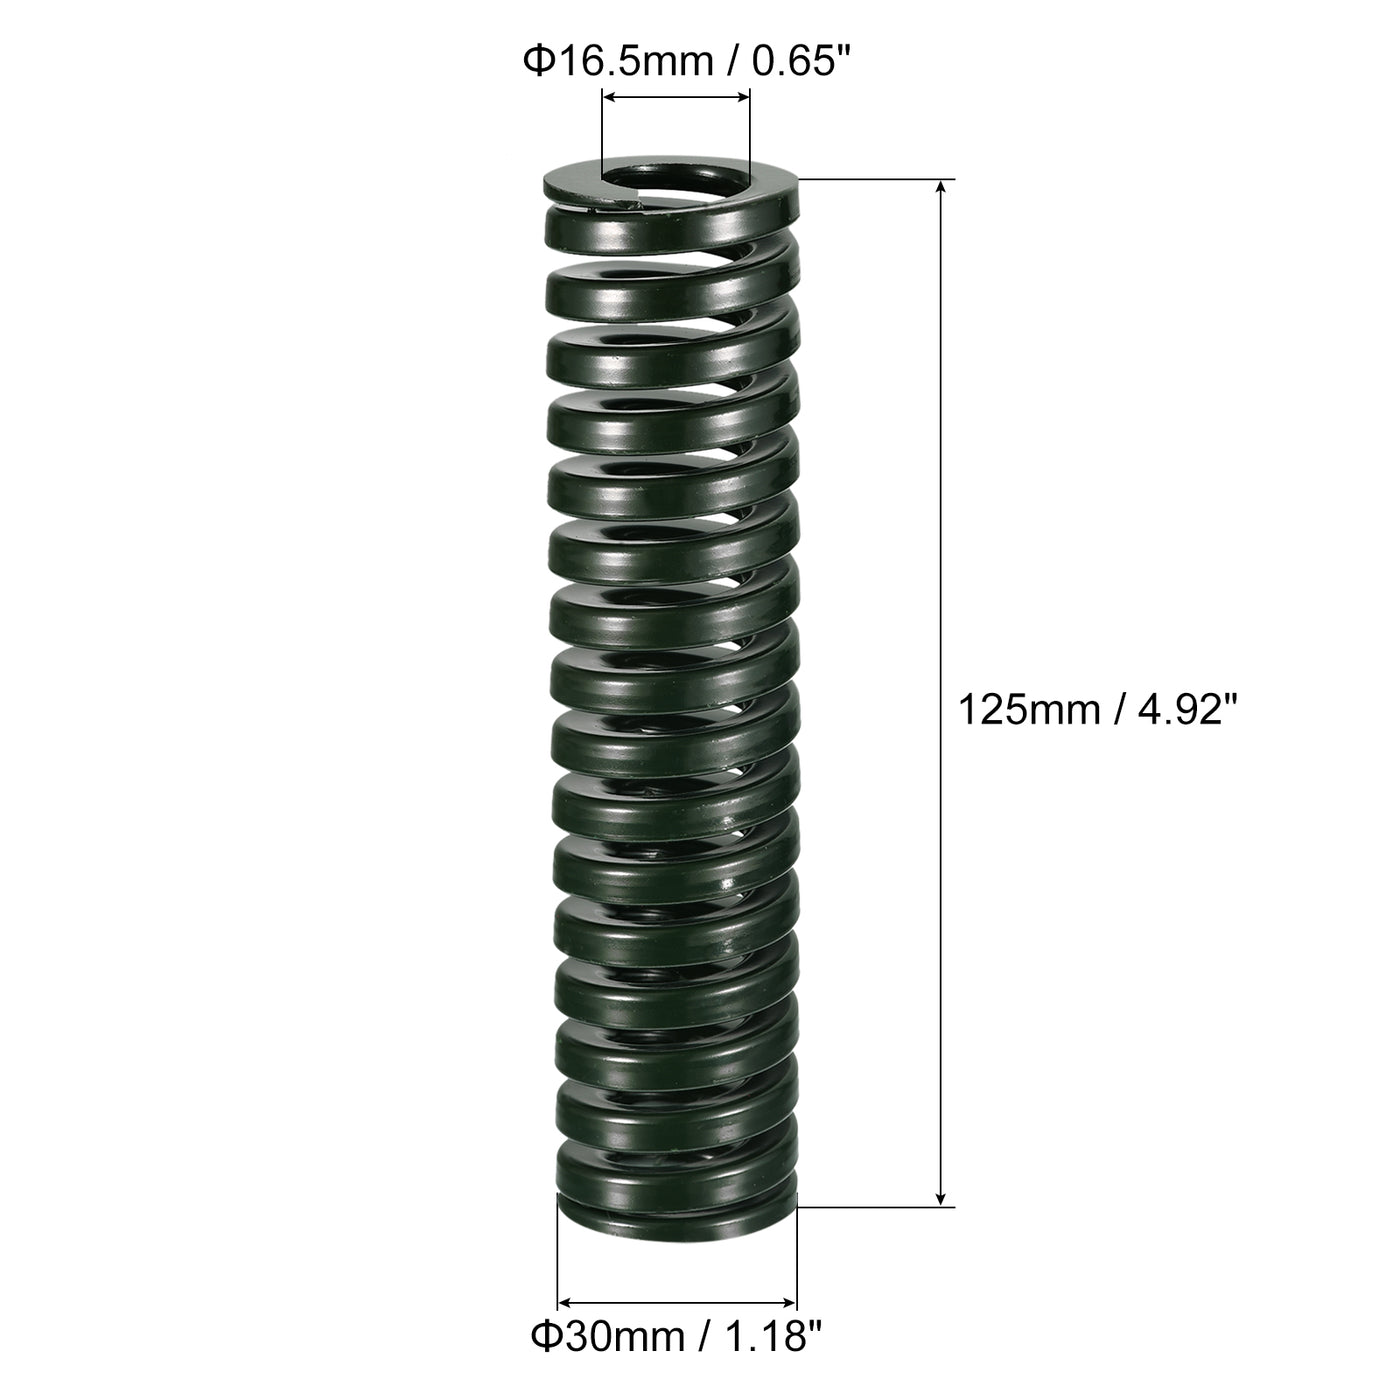 uxcell Uxcell 3D Printer Die Spring, 2pcs 30mm OD 125mm Long Spiral Stamping Compression Green